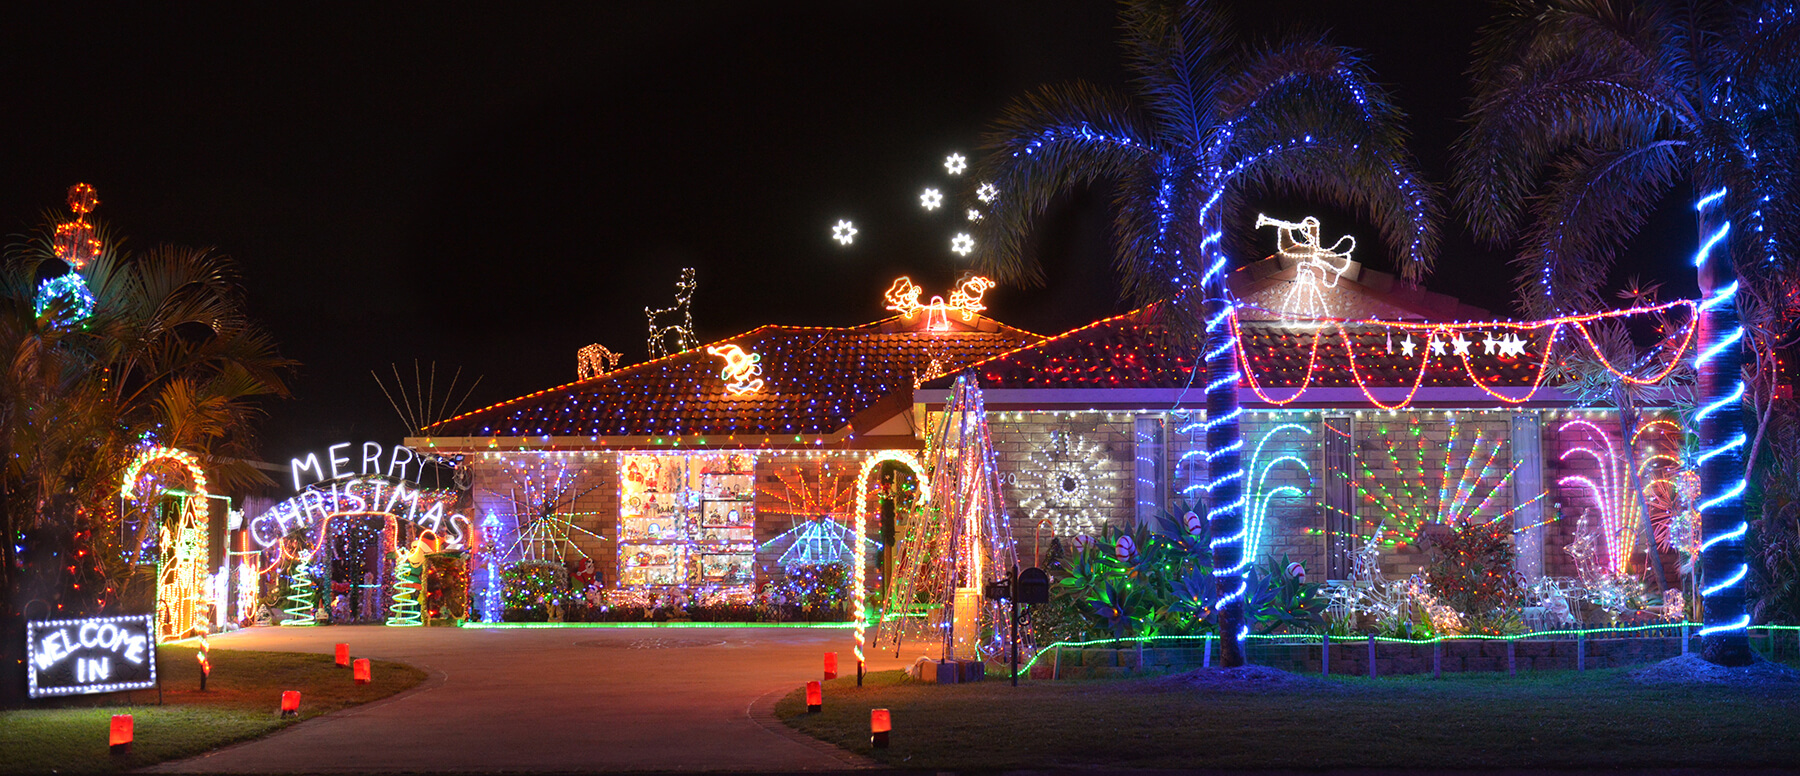 Evening shot of Christmas decorated house the Southern Hemisphere